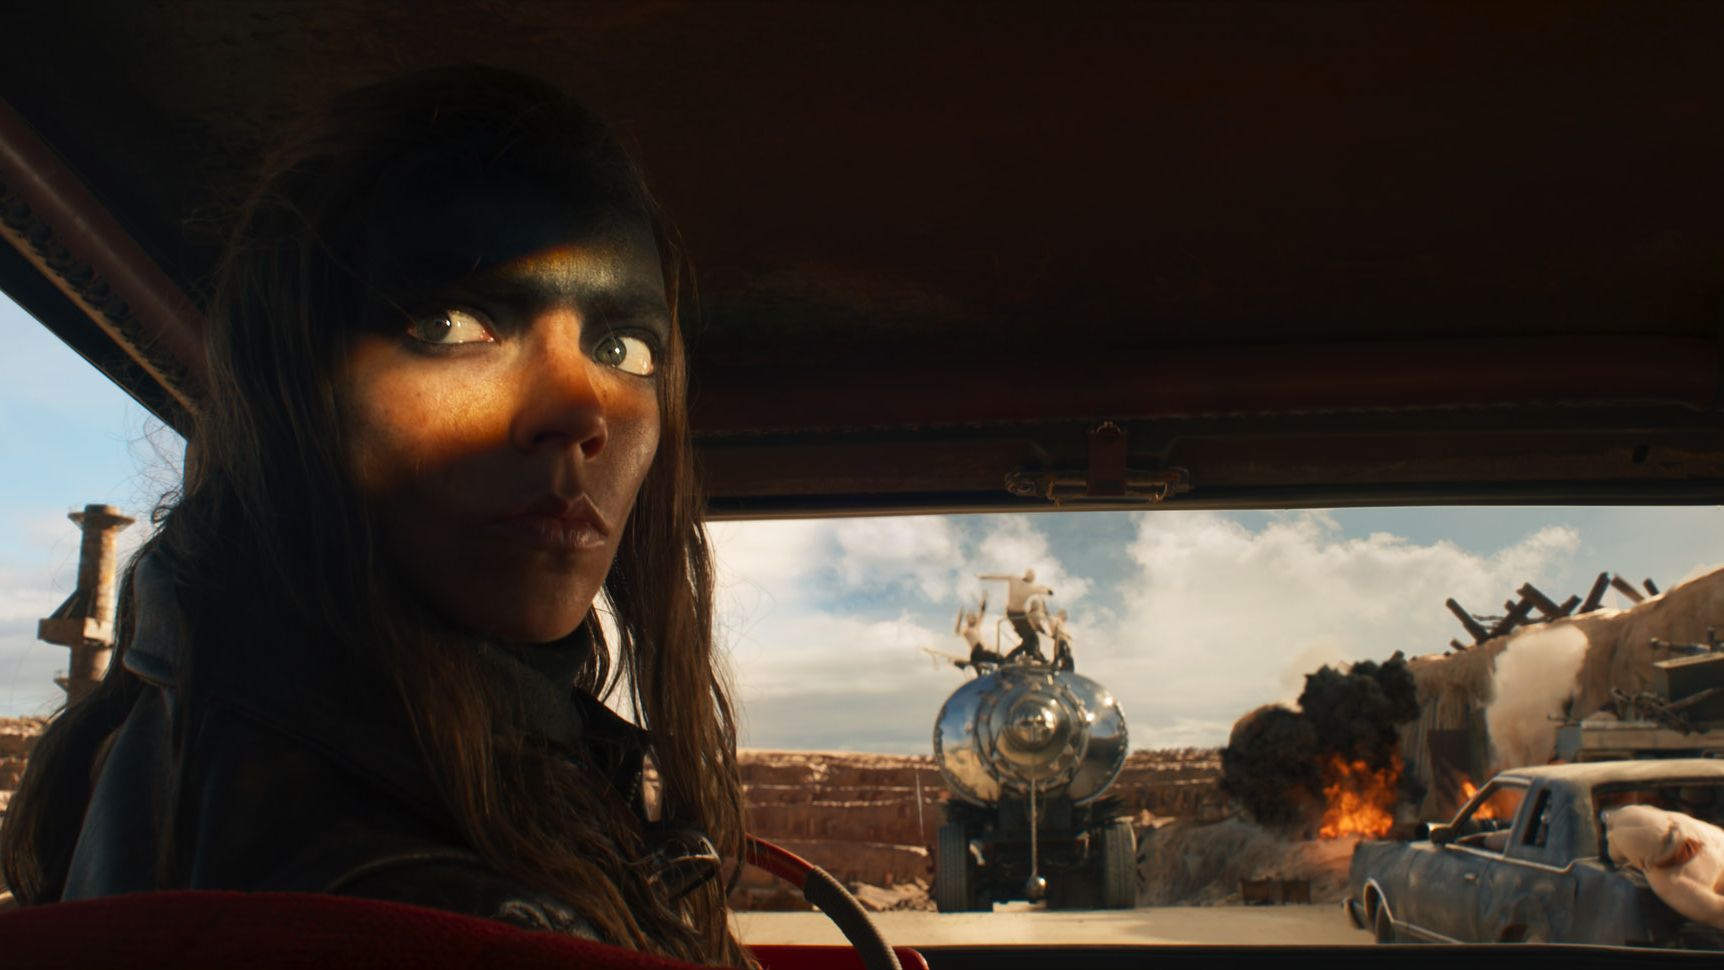 Furiosa: Release Date, Cast, News, and More on 'Mad Max' Prequel